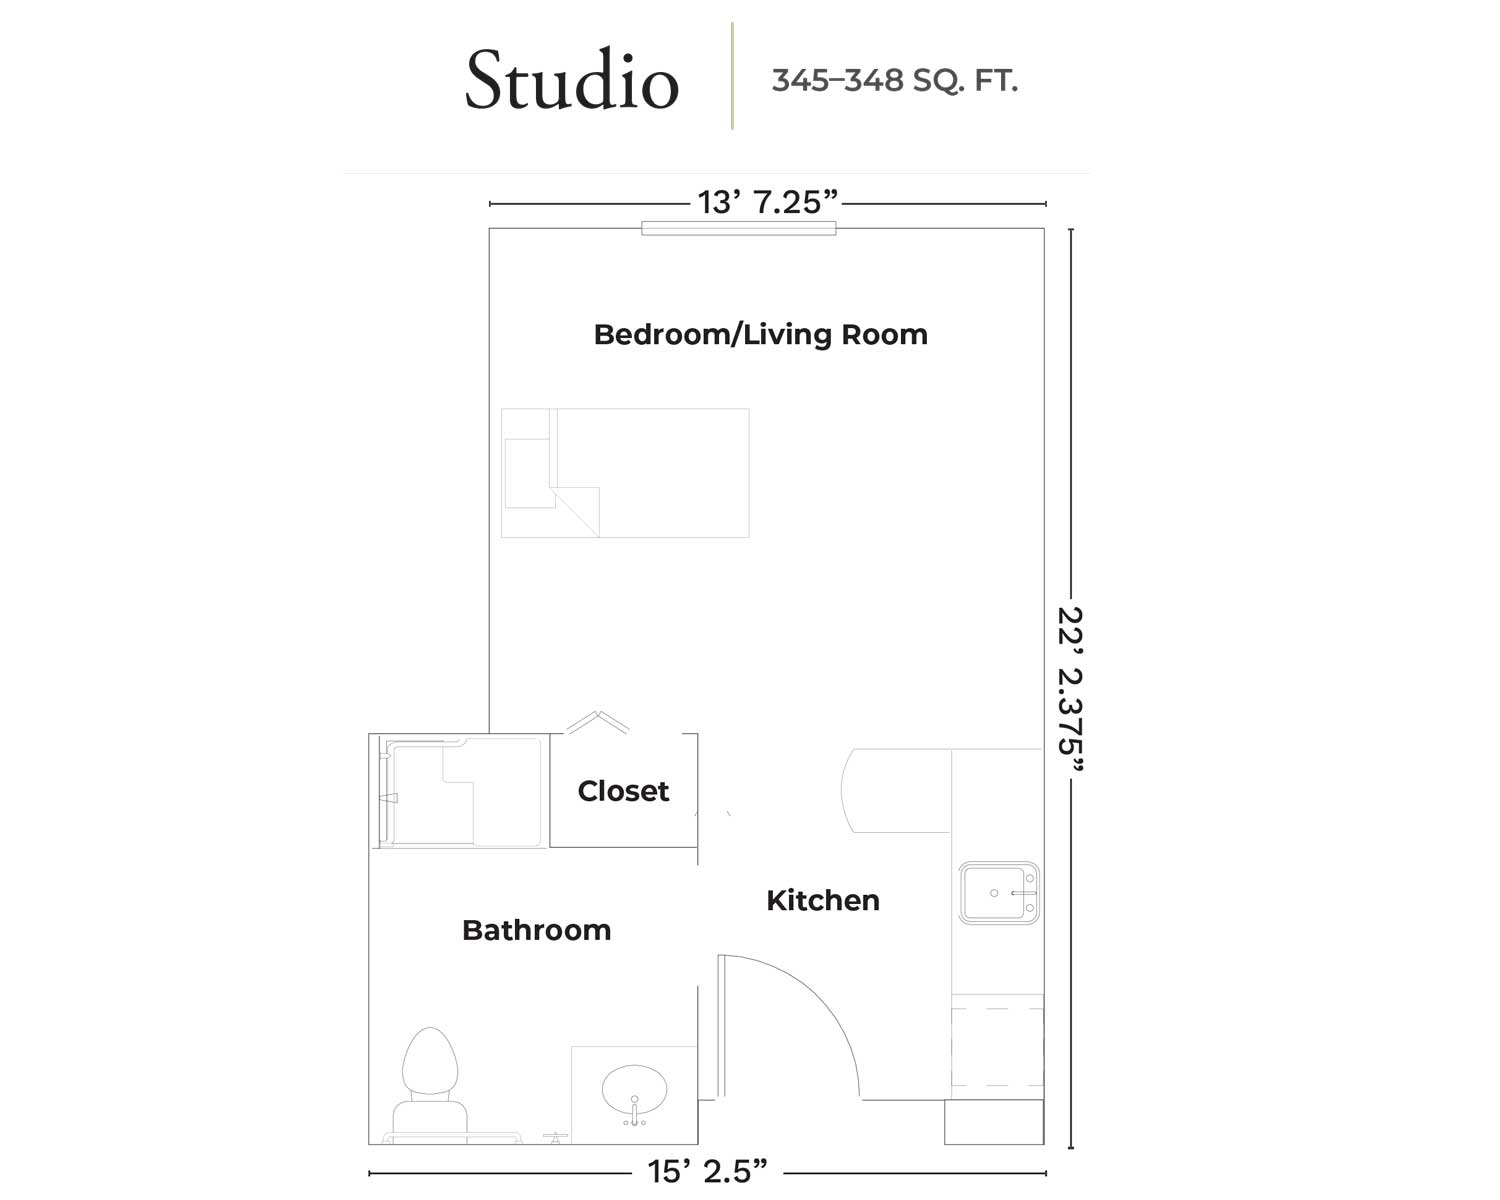 Detailed floor plan of a studio apartment with labeled kitchen, bathroom, closet, and bedroom areas.